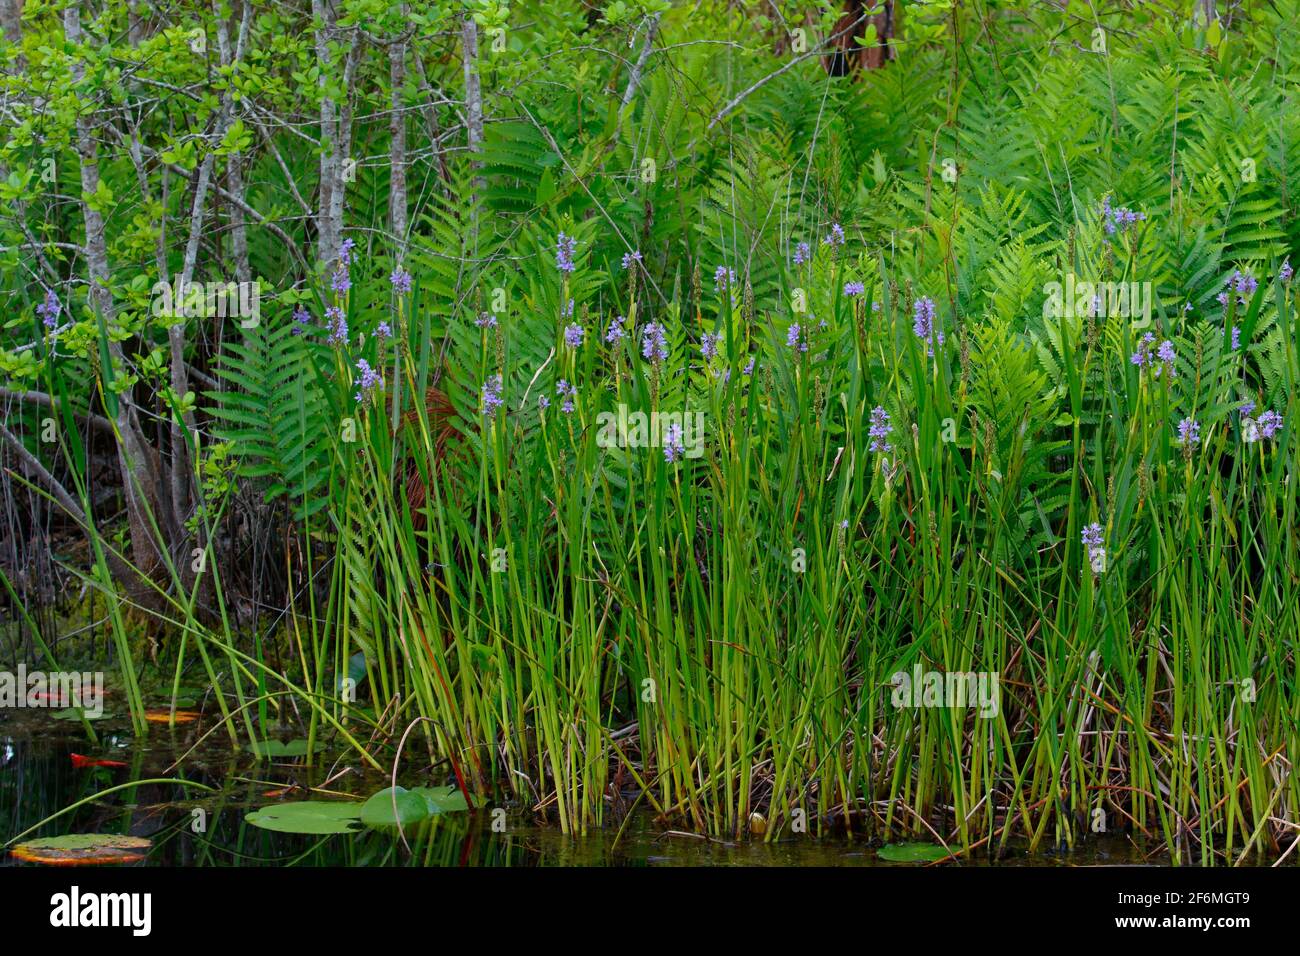 A crop of pickerel weed is blooming in a swamp. Stock Photo